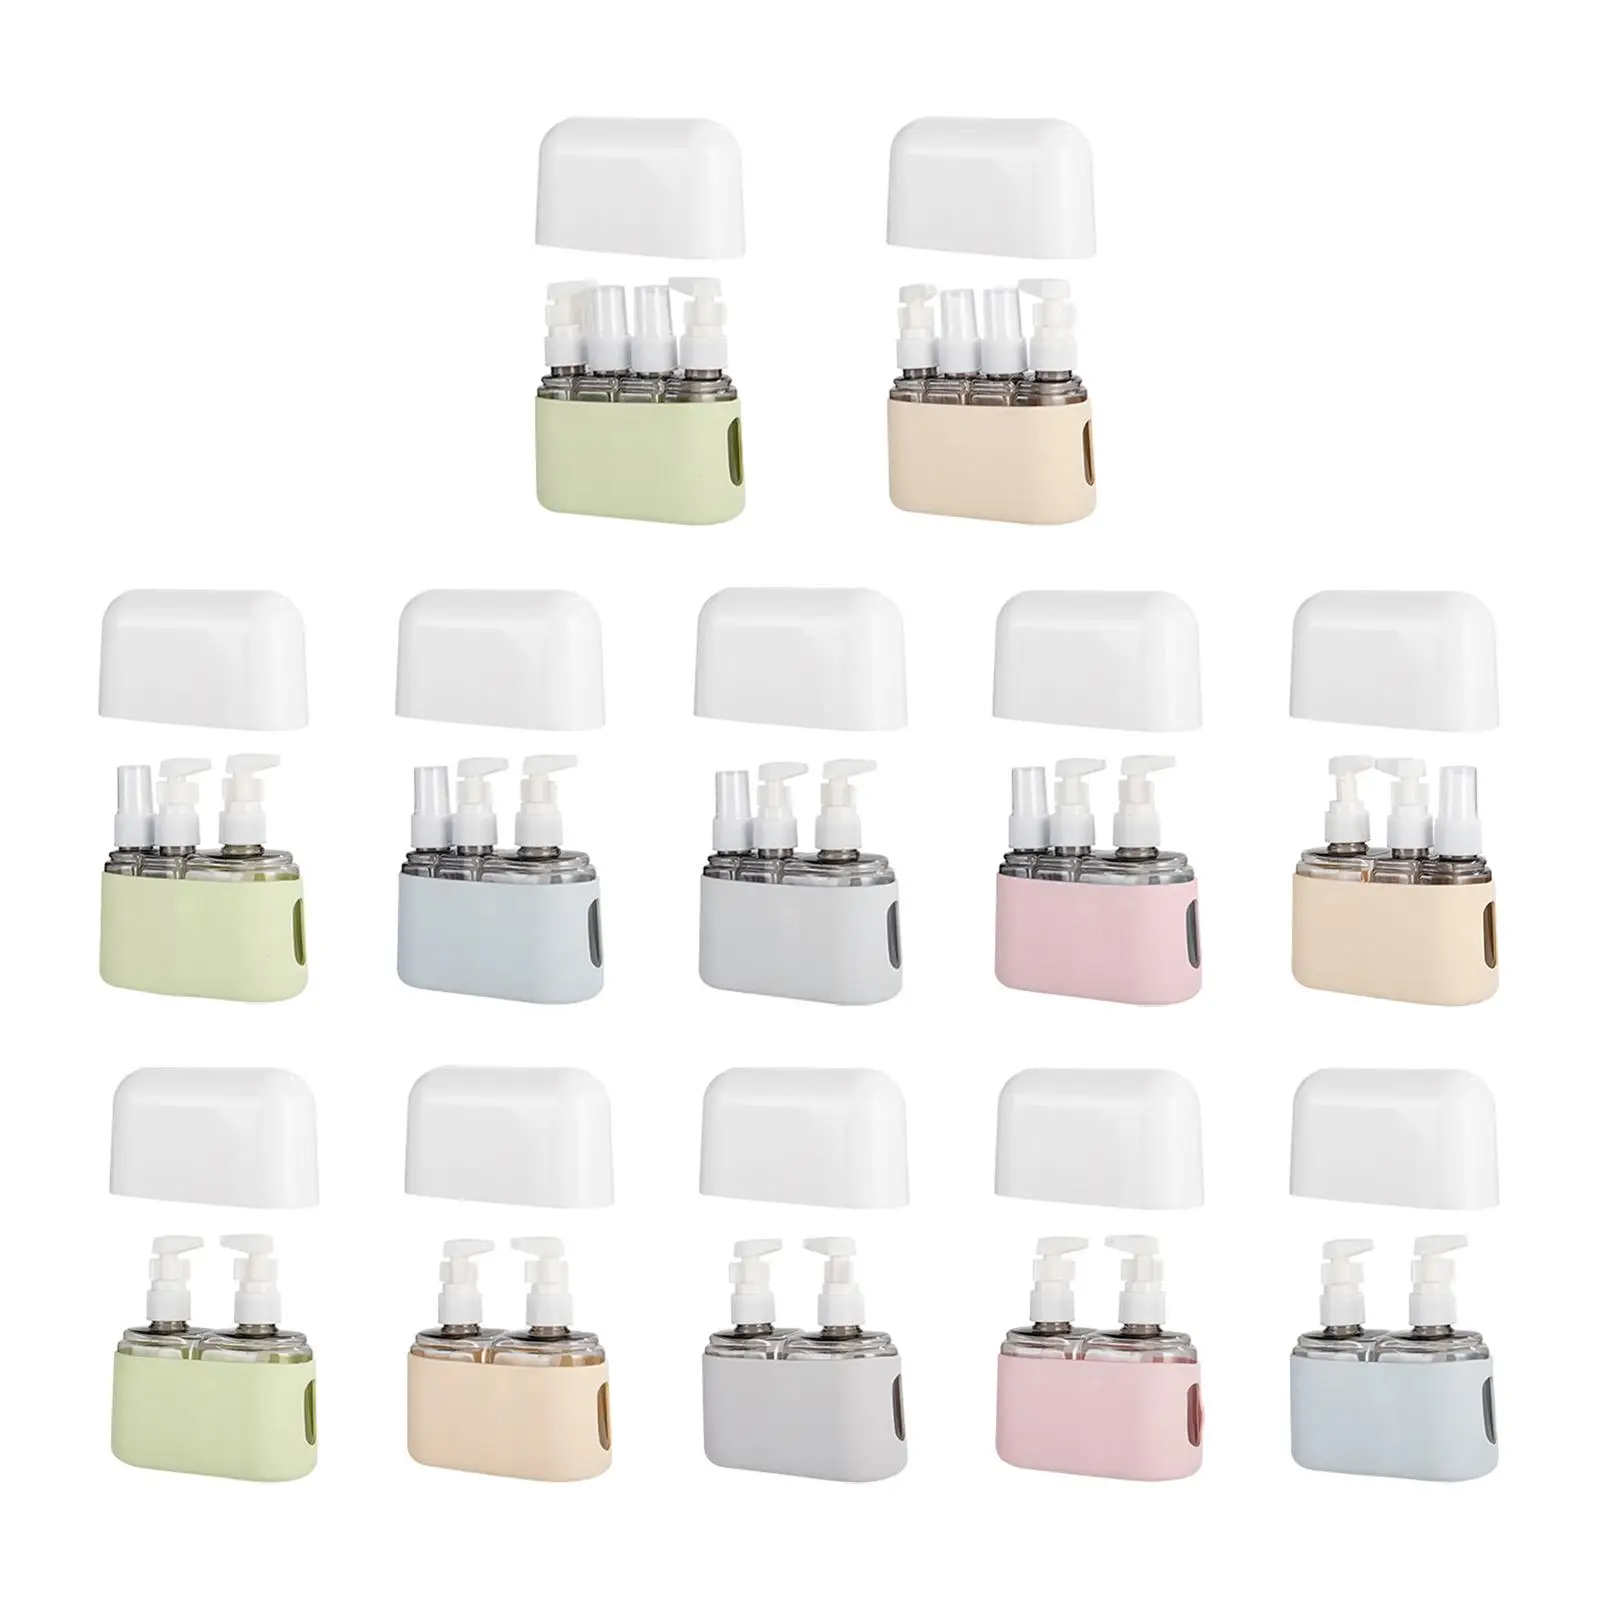 Travel Bottles for Toiletries Leakproof Compact Size Airplane Accessories for Body Wash Perfumes Cosmetics Foam Soap Conditioner creative personality ceramic toiletries five piece soap dish soap dispenser toothbrush cup lotion dispenser toilet accessories